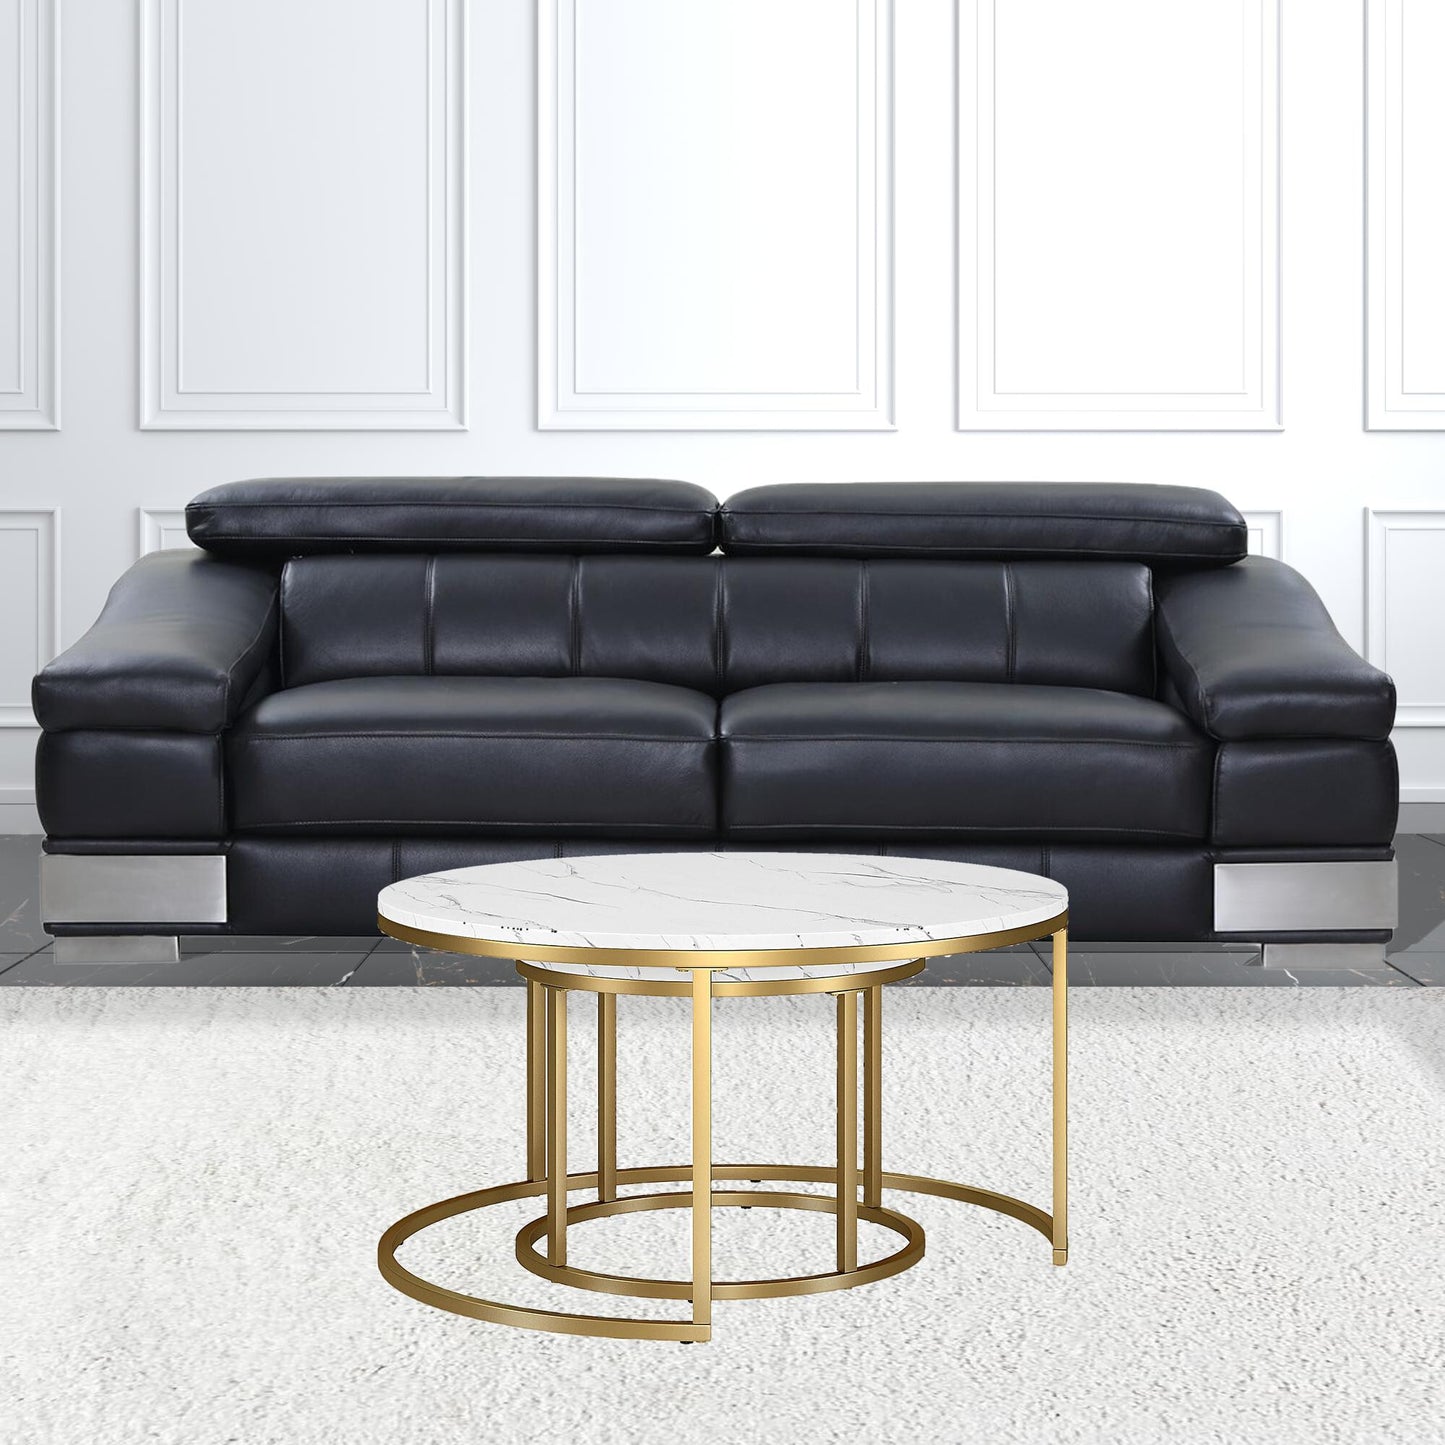 Set Of Two 35" Gold And White Faux Marble Round Nested Coffee Tables